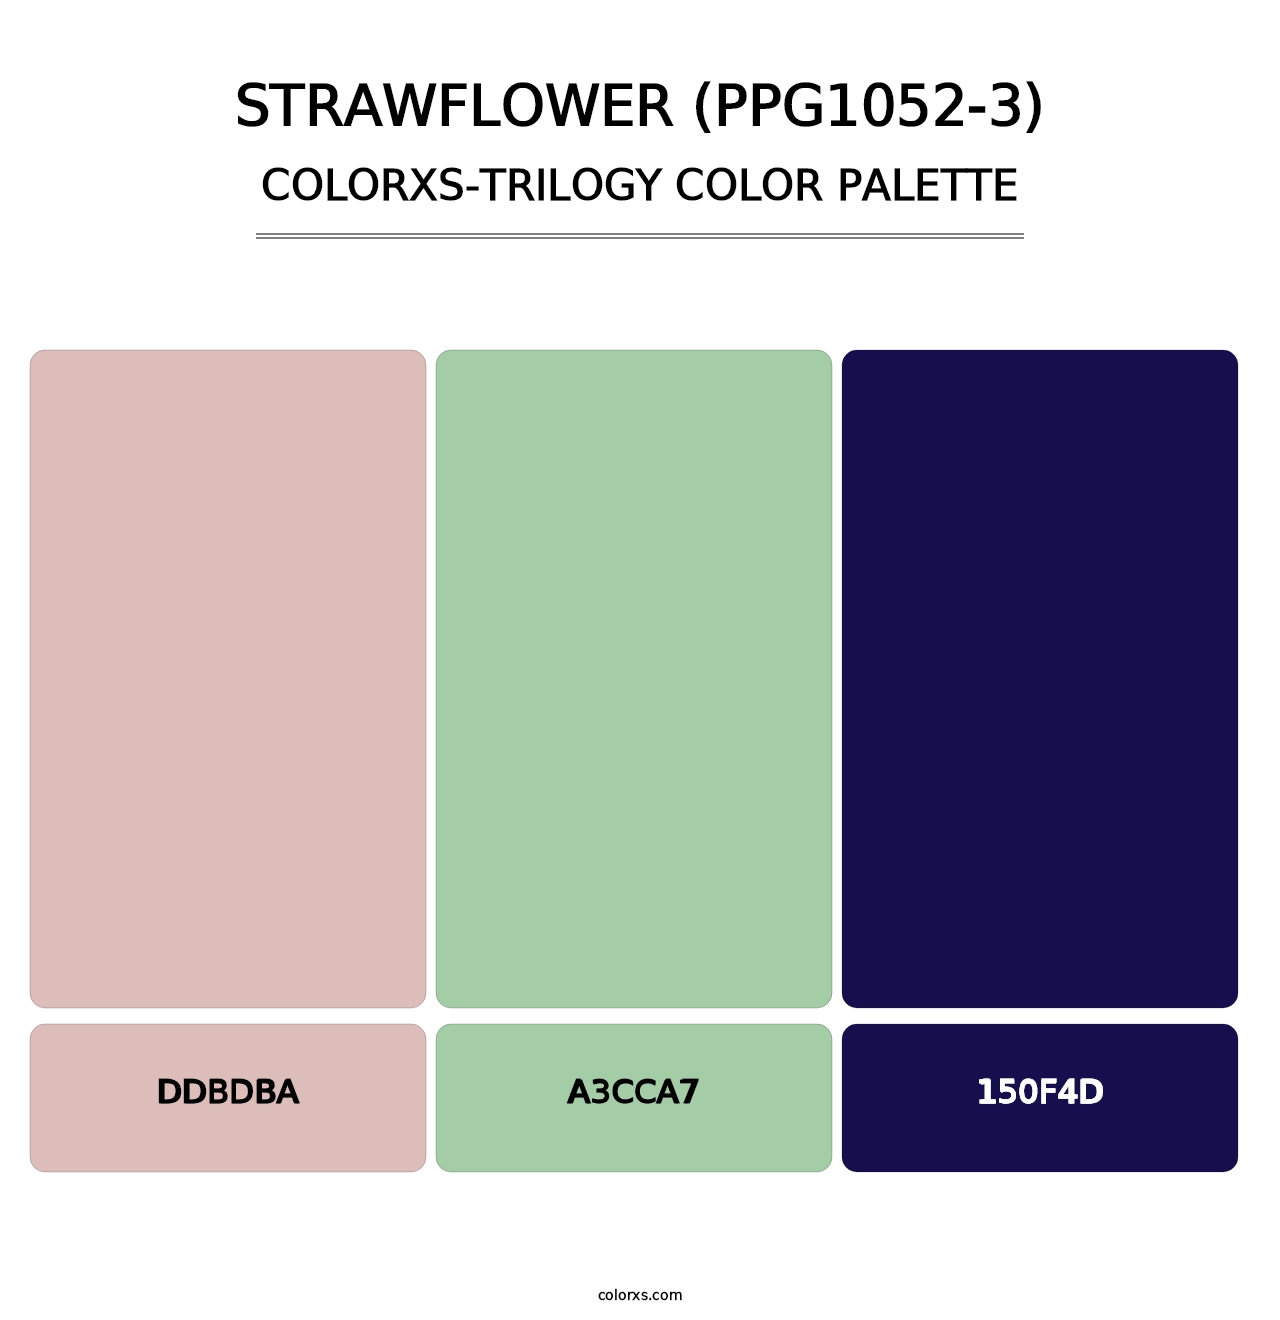 Strawflower (PPG1052-3) - Colorxs Trilogy Palette